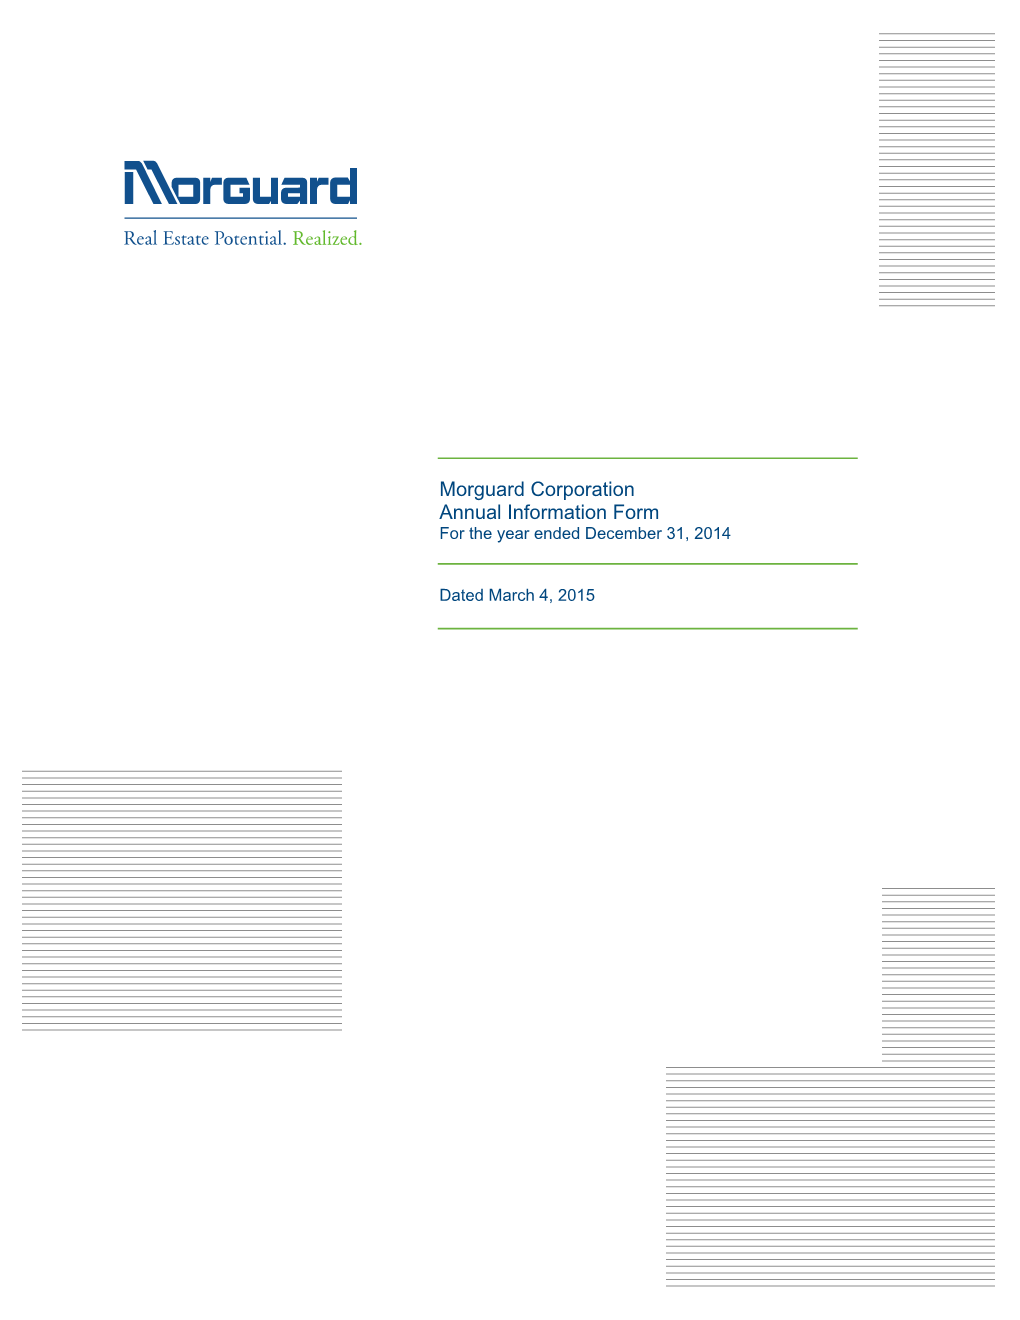 Morguard Corporation Annual Information Form for the Year Ended December 31, 2014